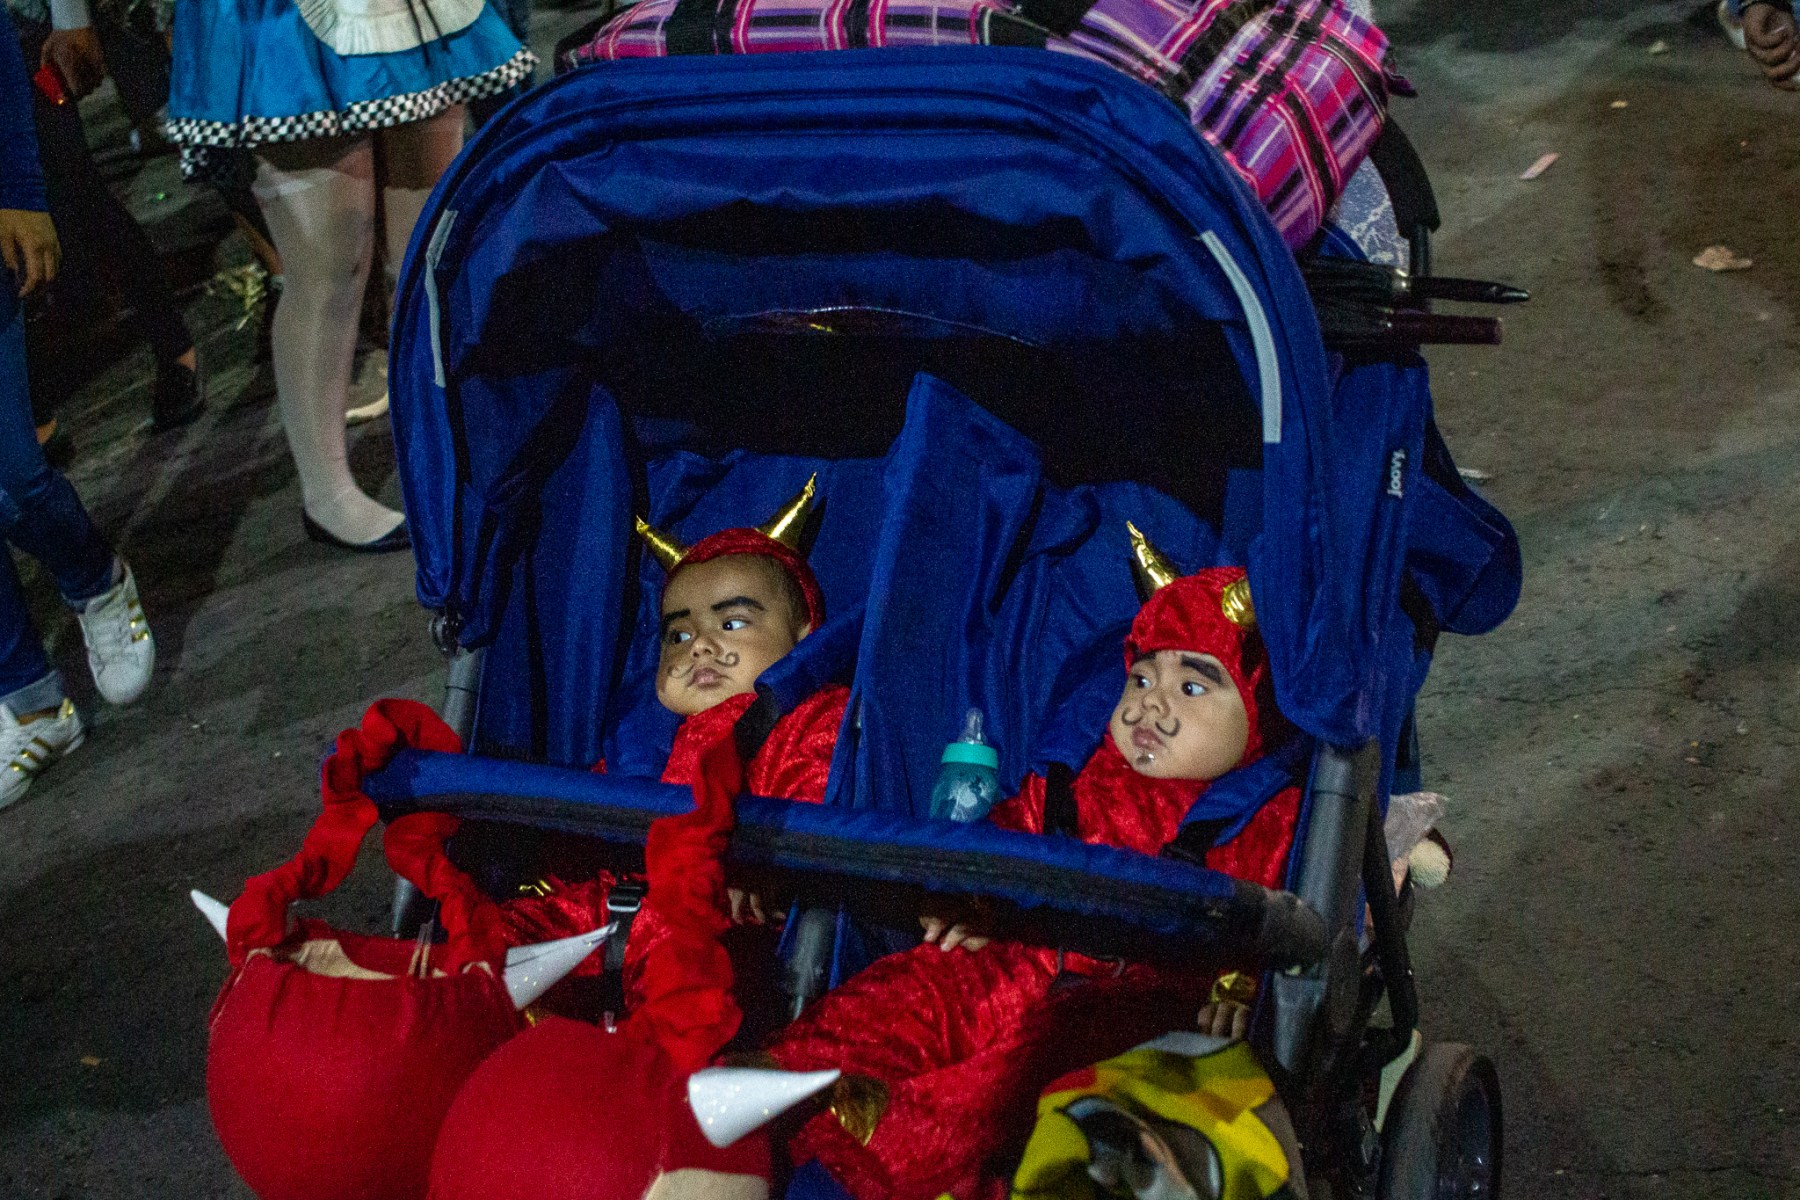 A pair of babies dressed in their finest satanic attire are wheeled along outside of the cemetery.